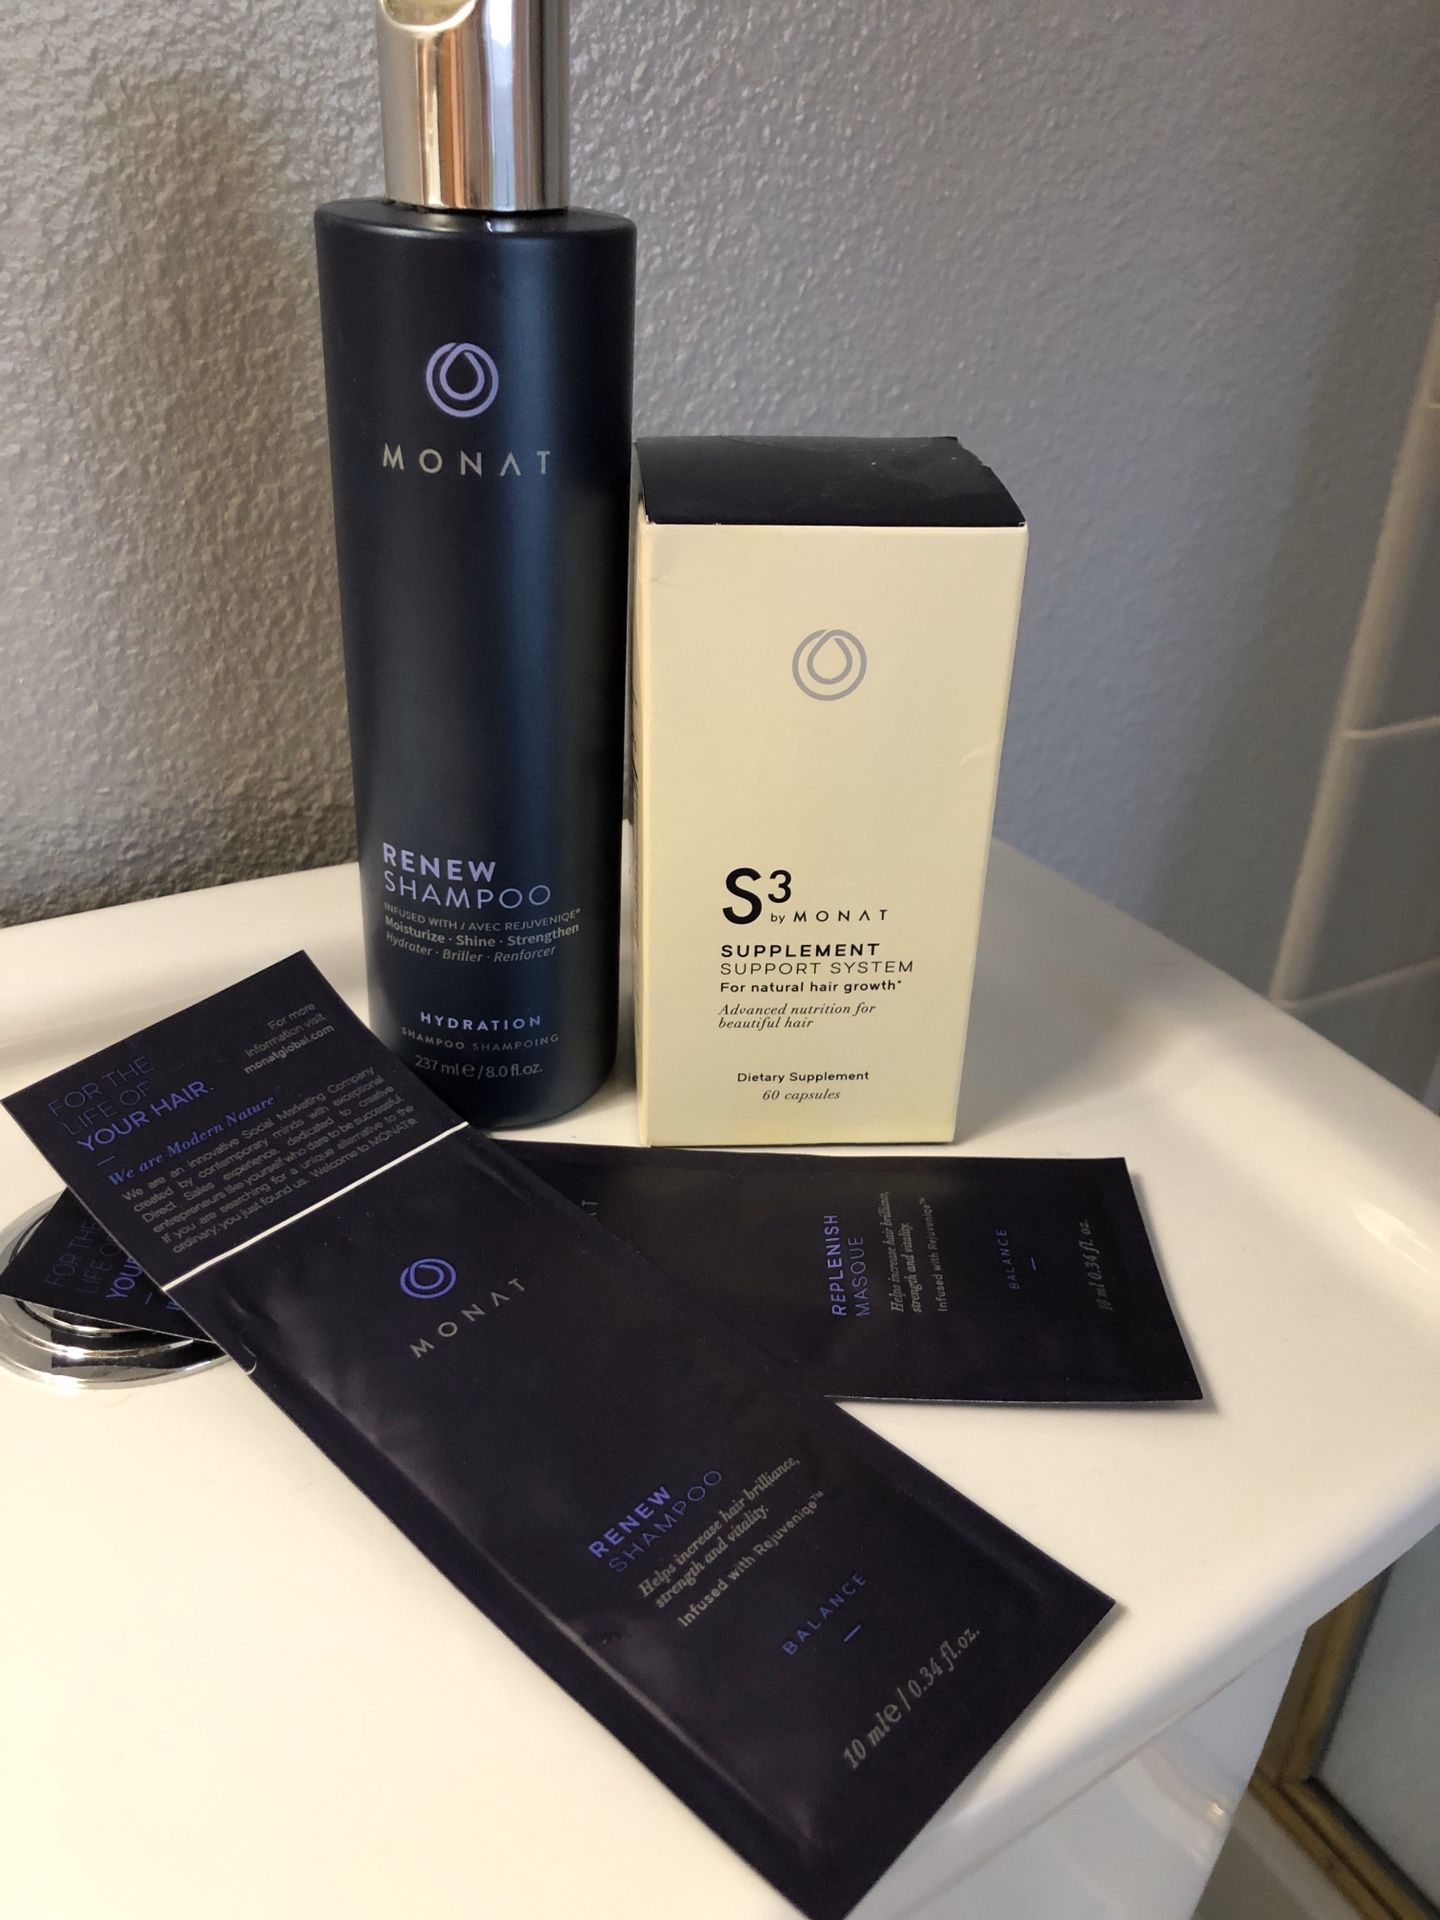 New Monat products